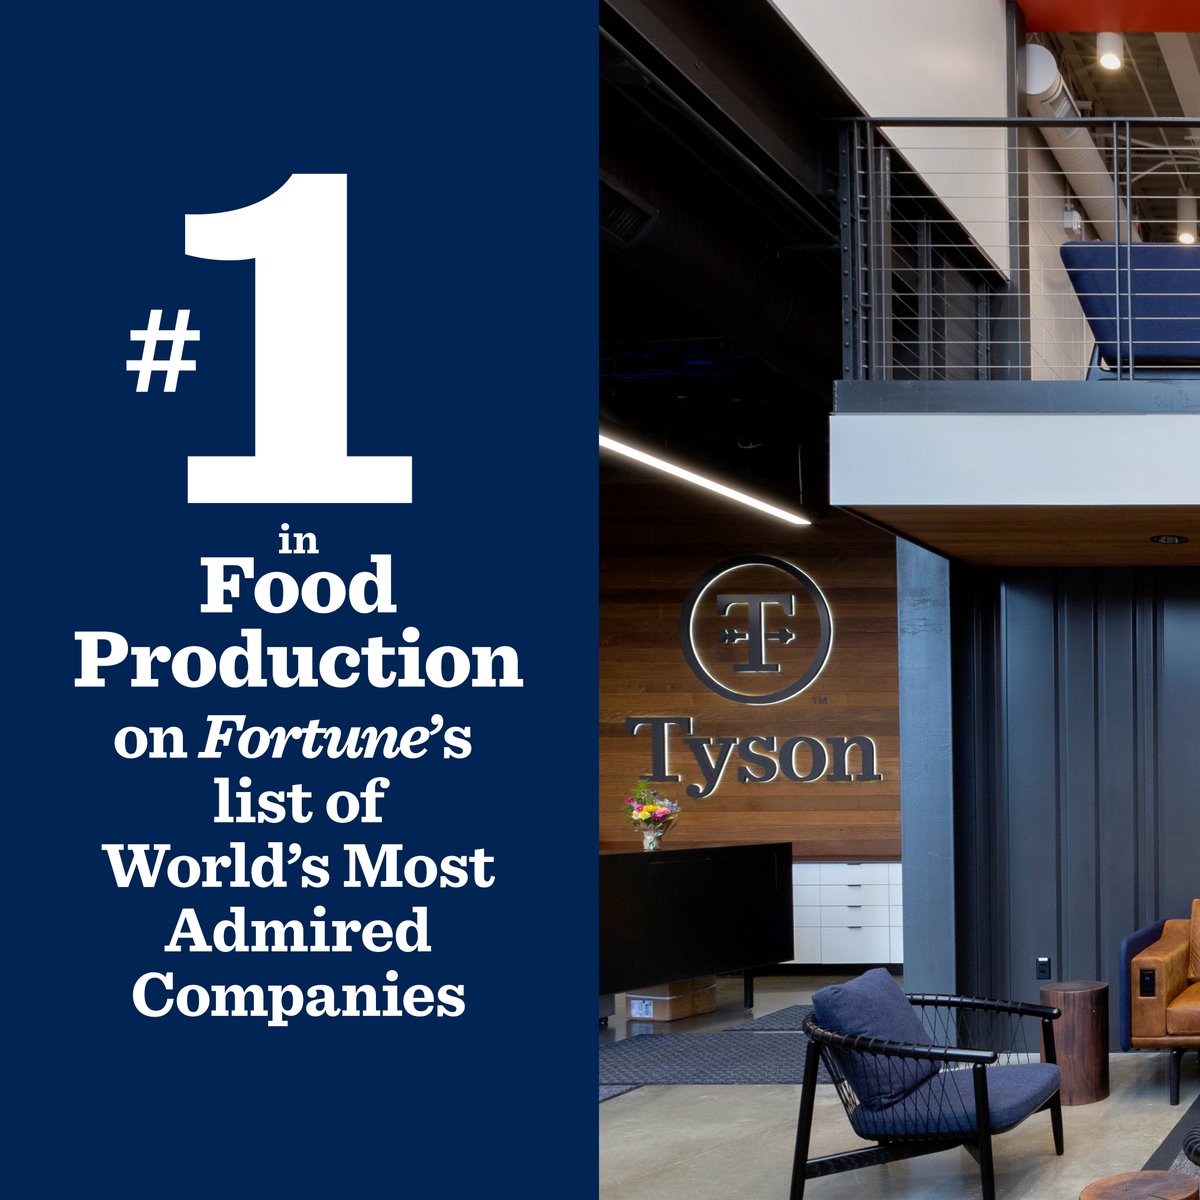 We're honored to be ranked #1 in food production for the seventh consecutive year by @FortuneMagazine on its annual Most Admired Companies list. Thank you to our team members around the world who help us strive for excellence in all we do. #TysonTogether | spr.ly/601935JjV